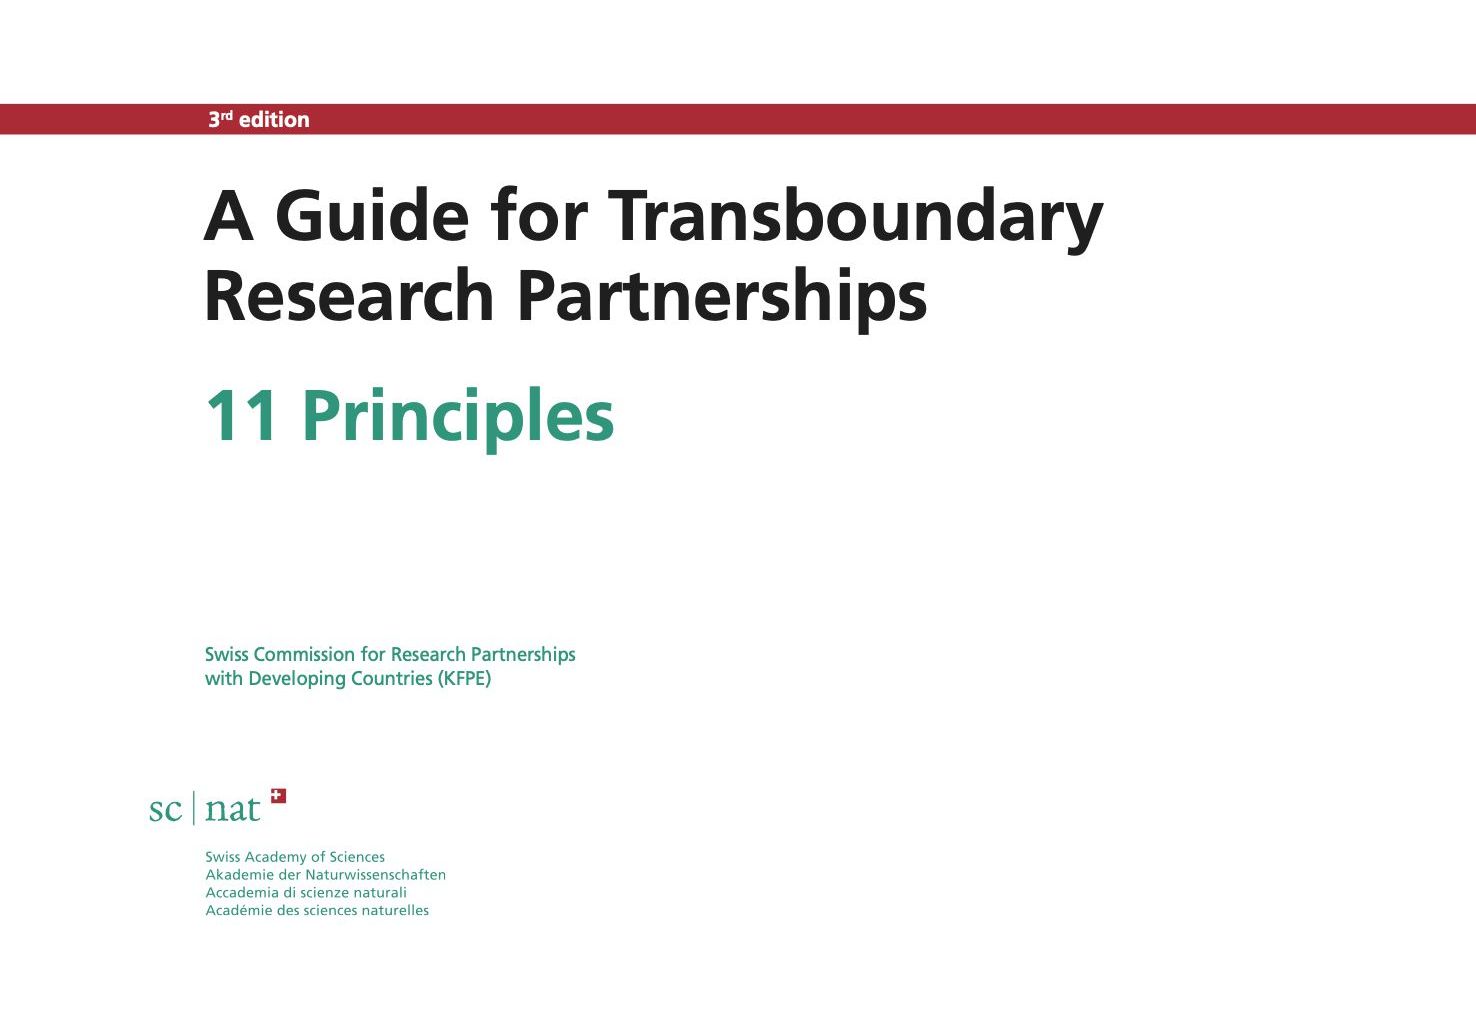 KFPE Guide for Transboundary Research Partnerships